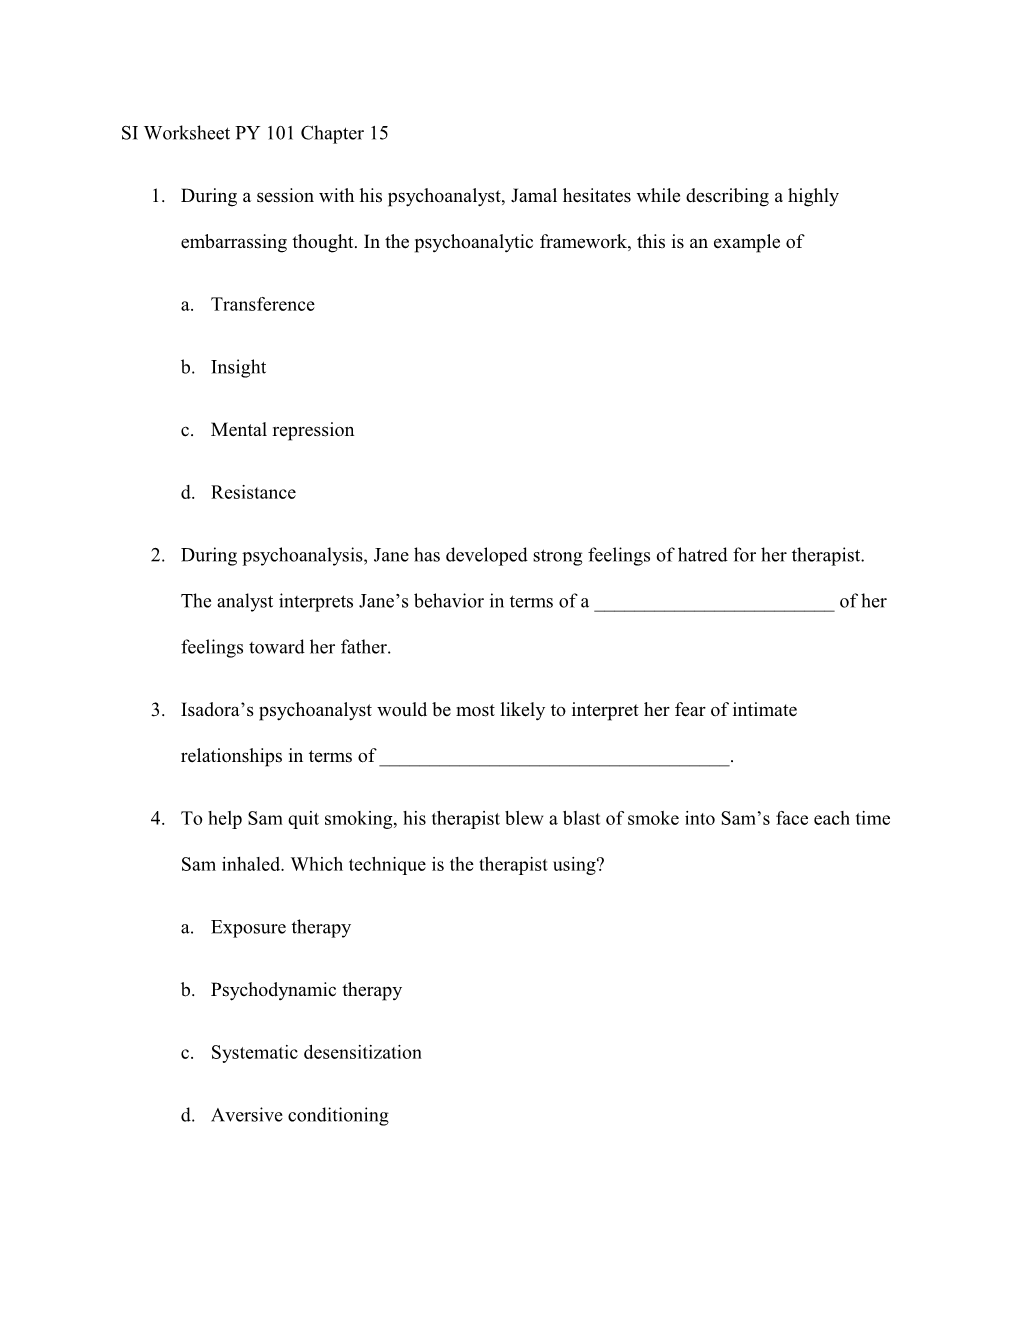 SI Worksheet PY 101 Chapter 15